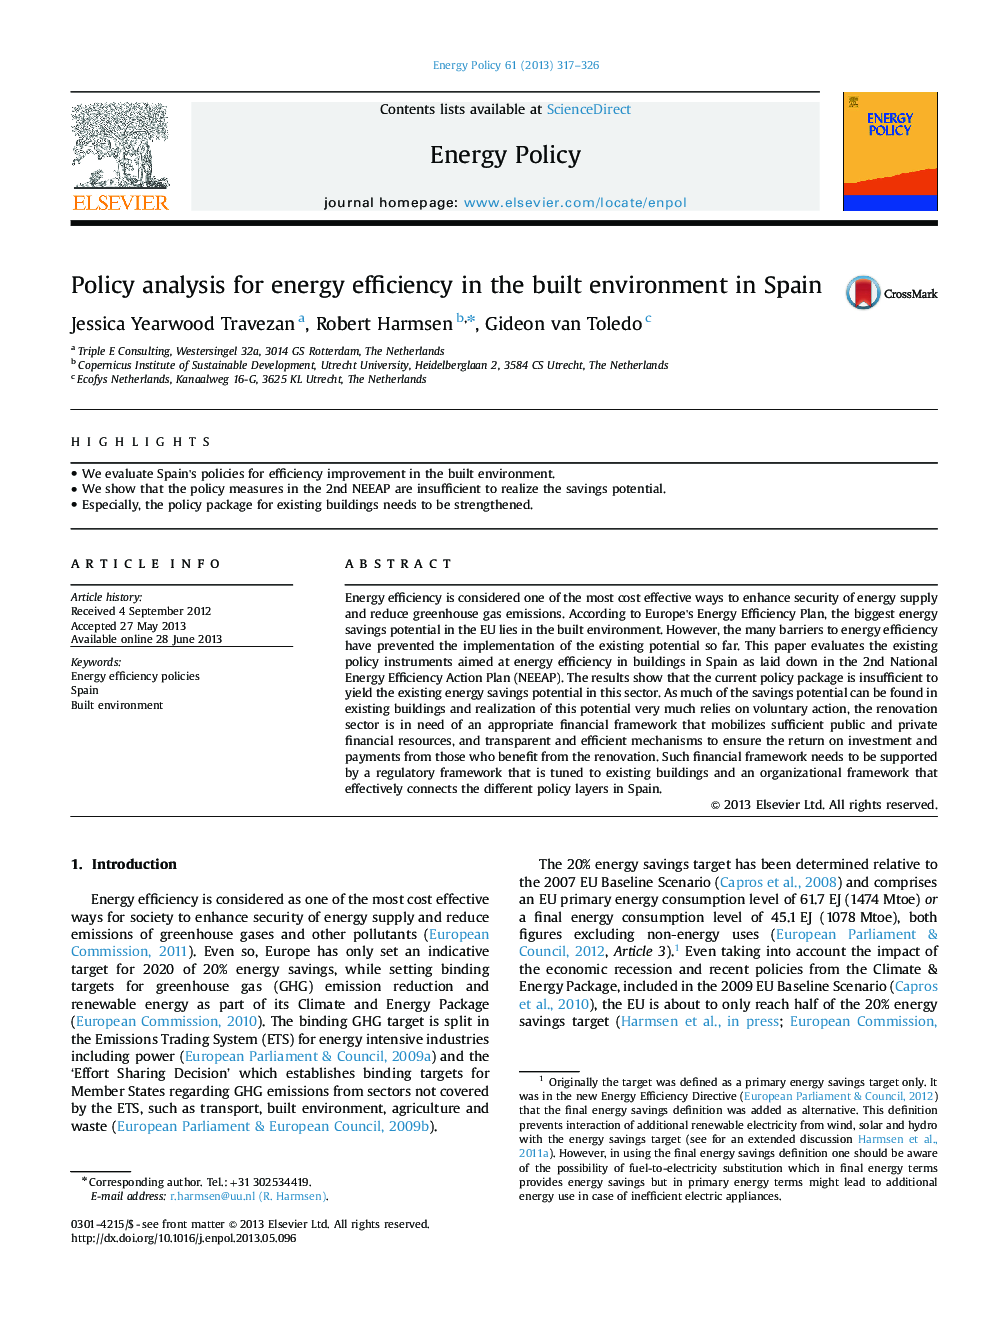 Policy analysis for energy efficiency in the built environment in Spain